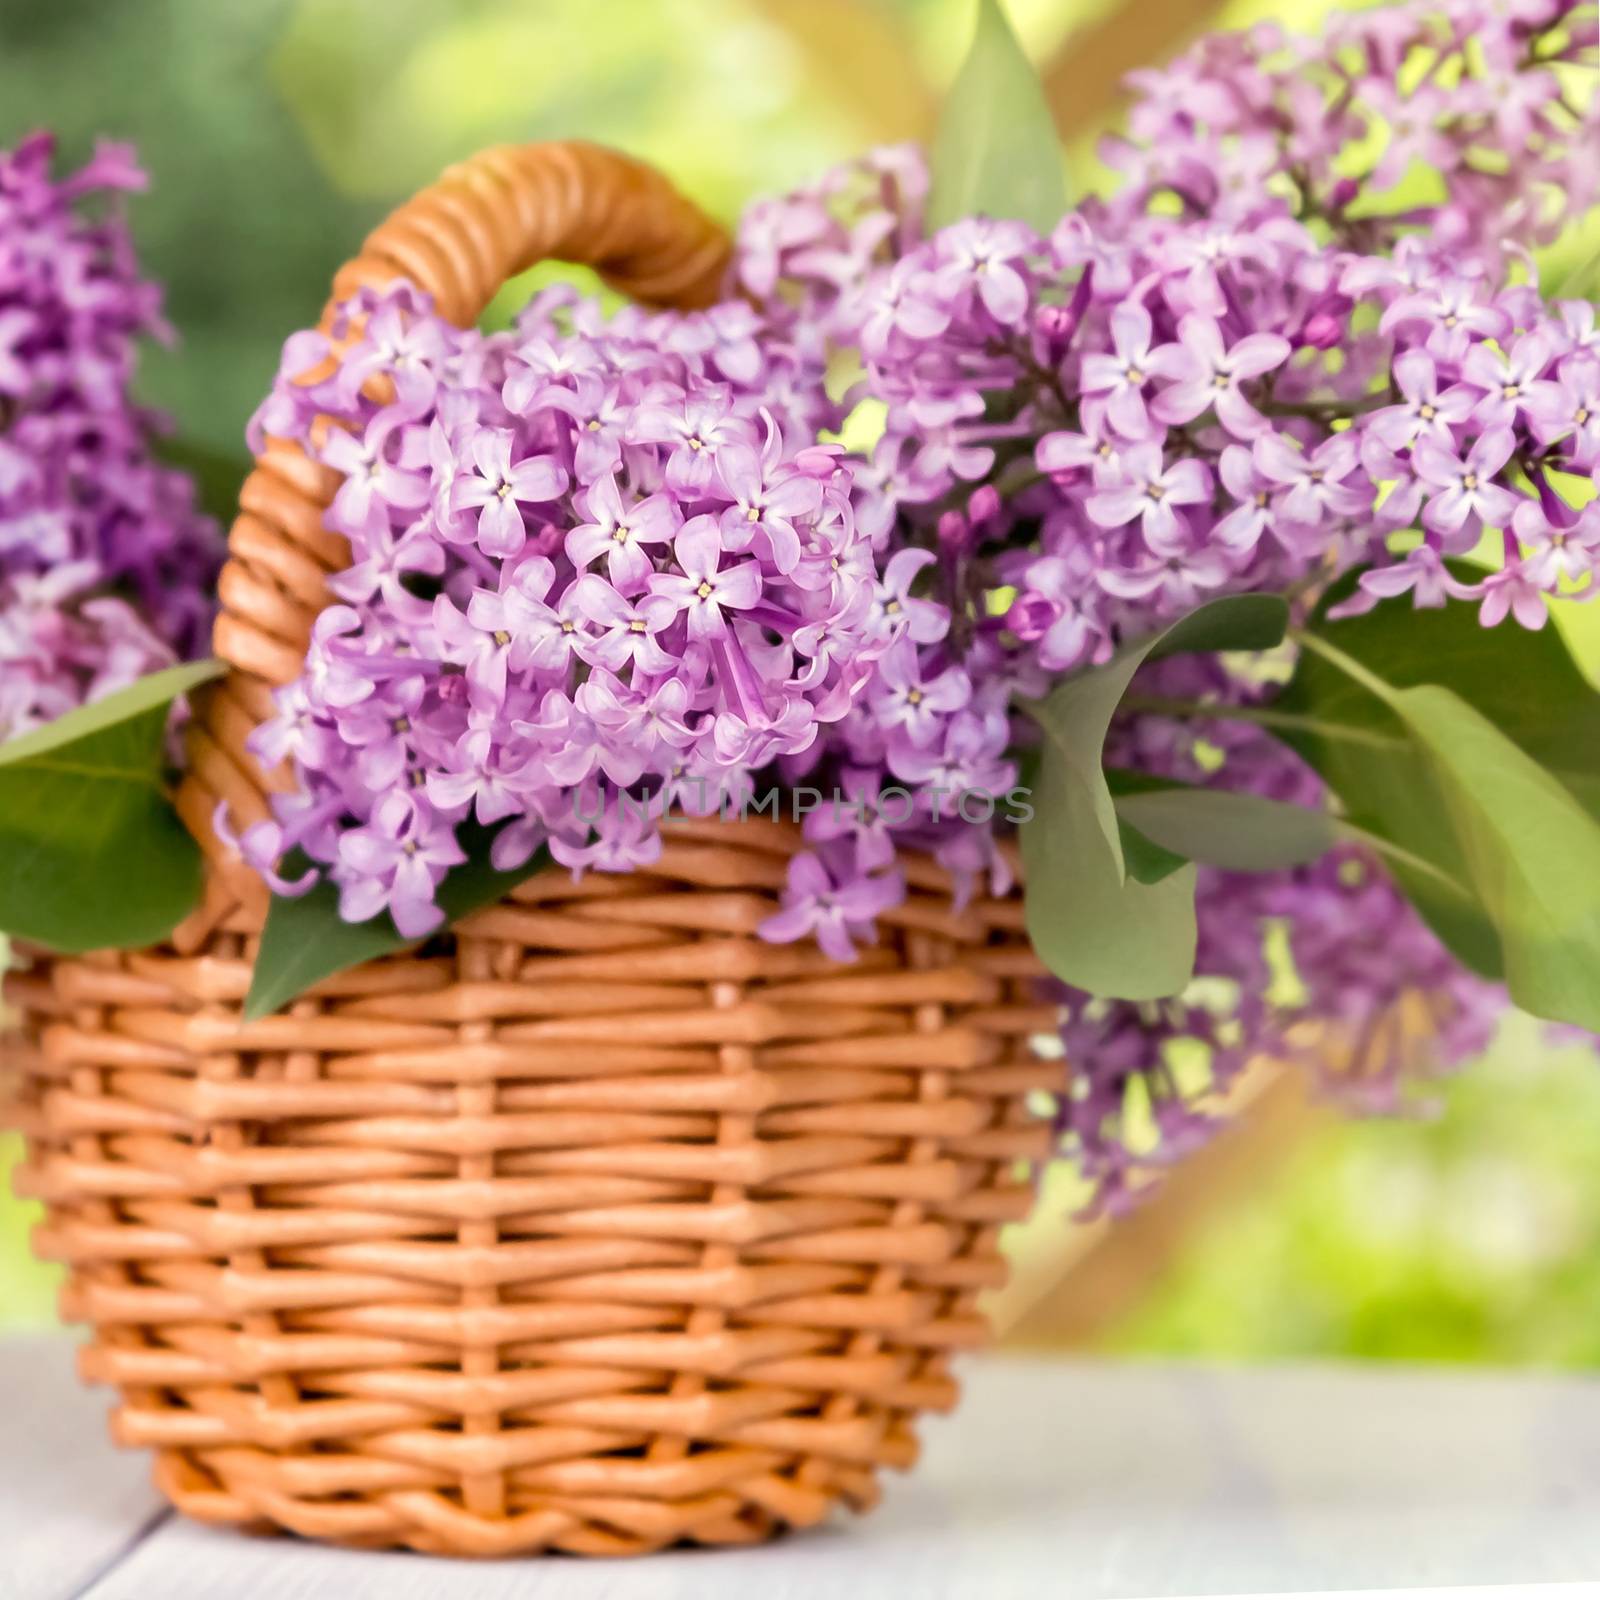 Basket with a bouquet of lilac flowers on a white wooden table in the summerhouse in the garden by galsand